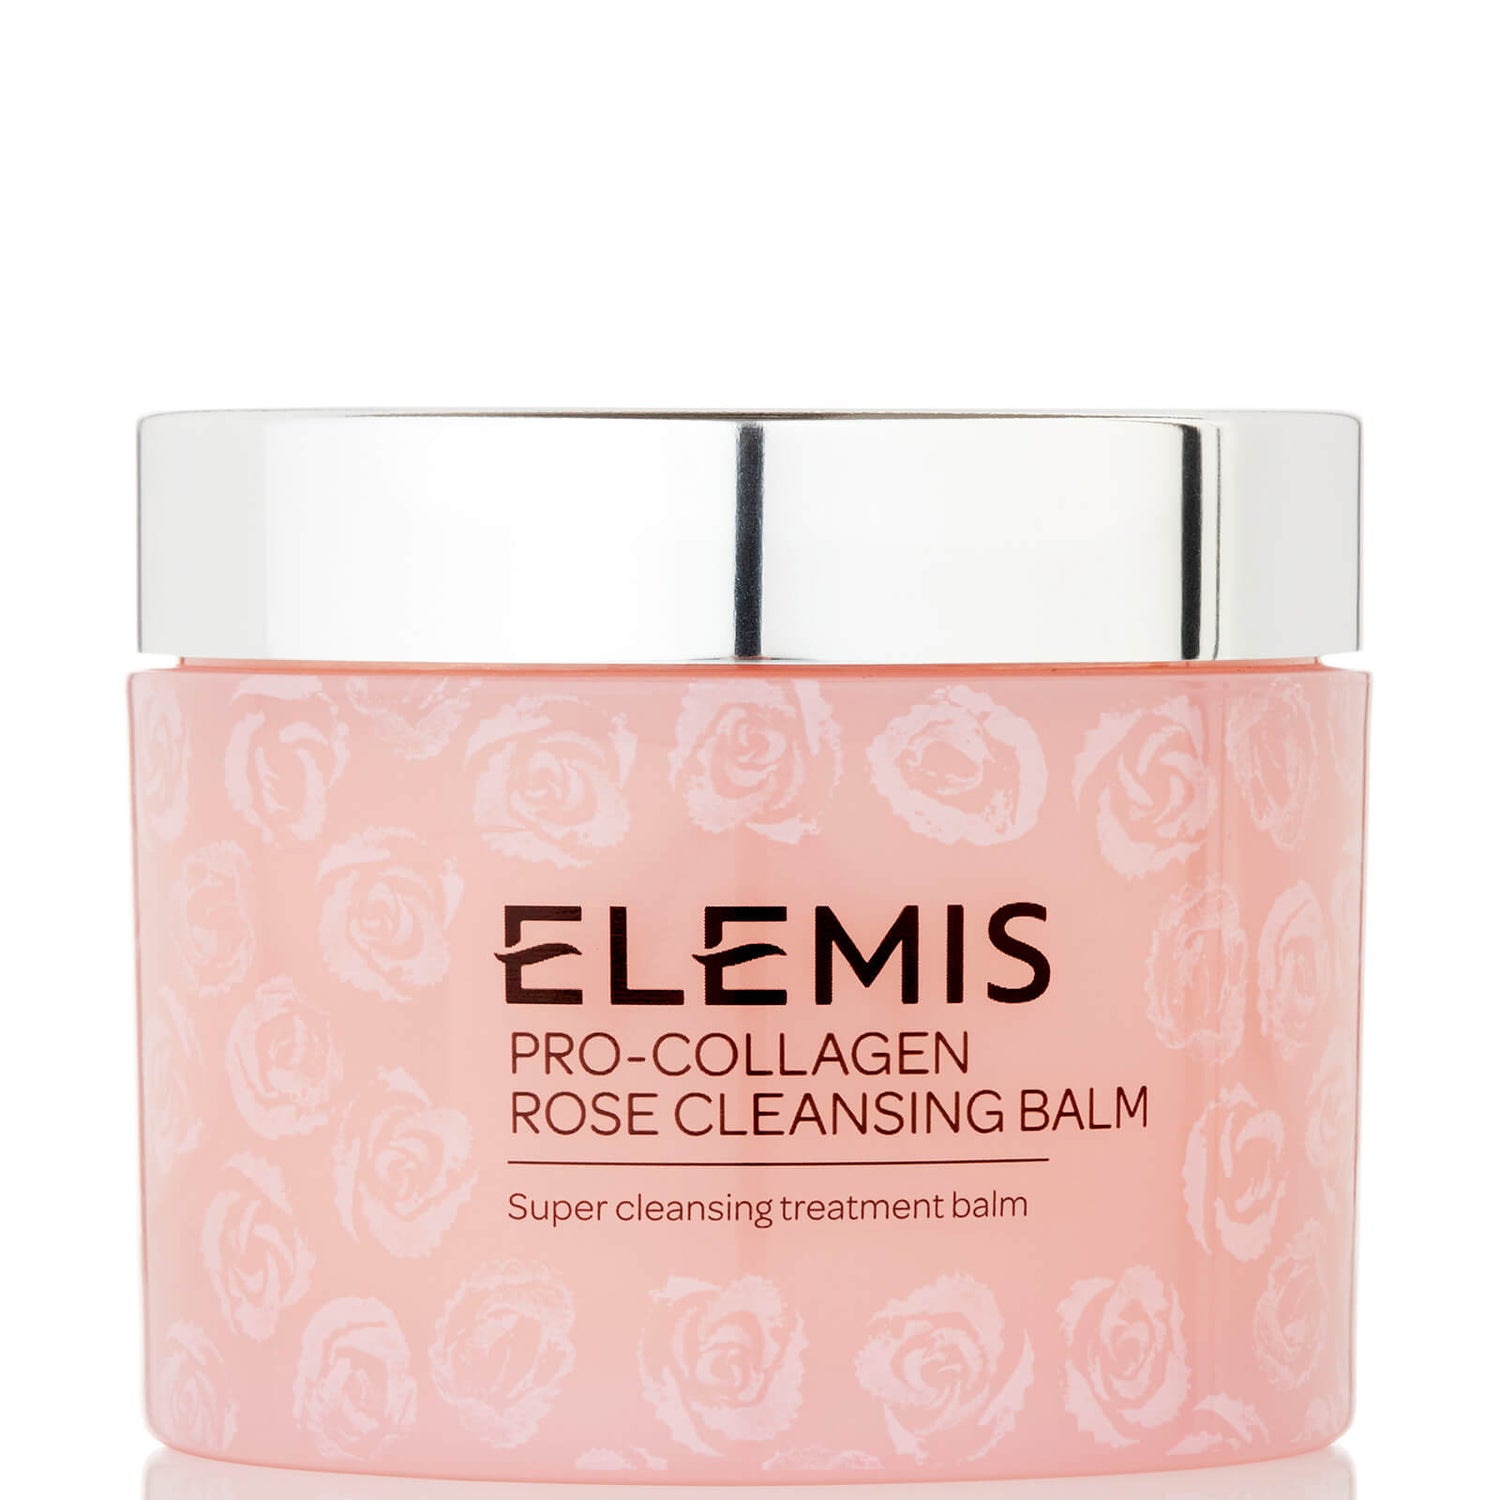 Elemis Limited Edition Pro-Collagen Rose Cleansing Balm 200g